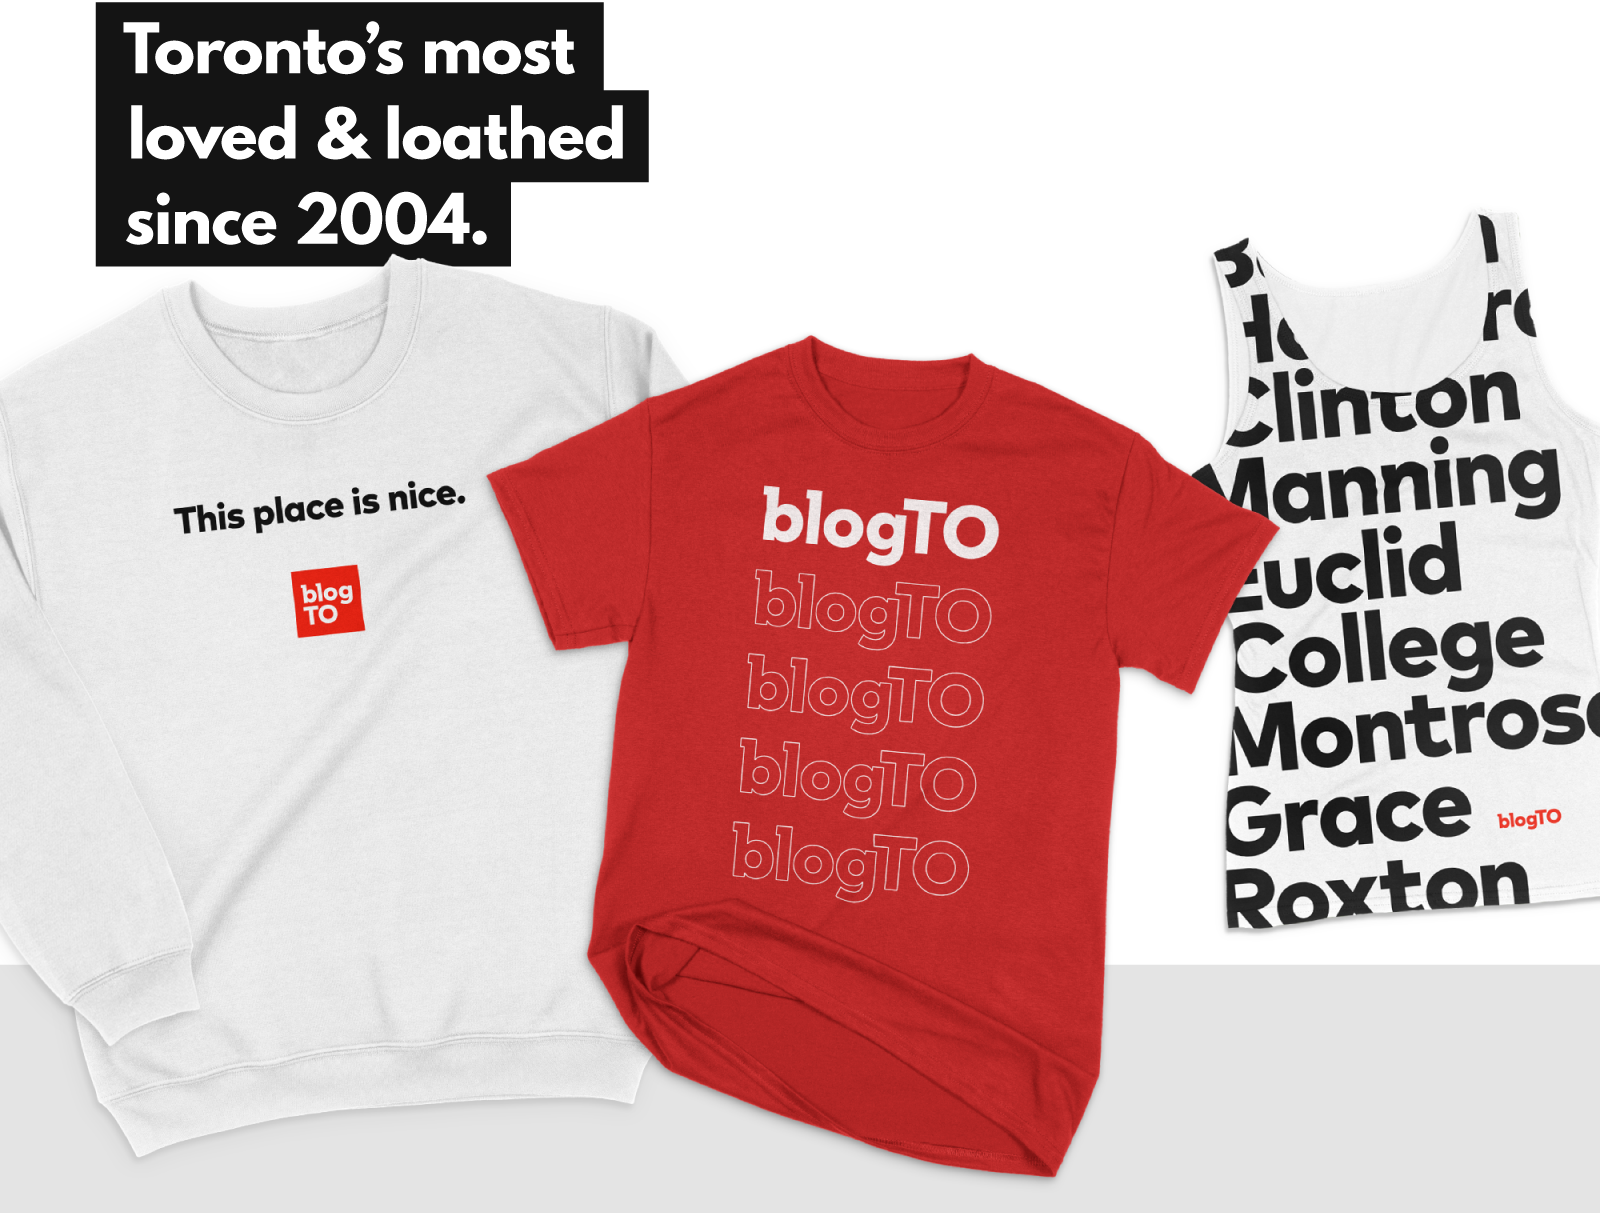 blogTO branded apparel design featuring the logo design, typography, and brand colour